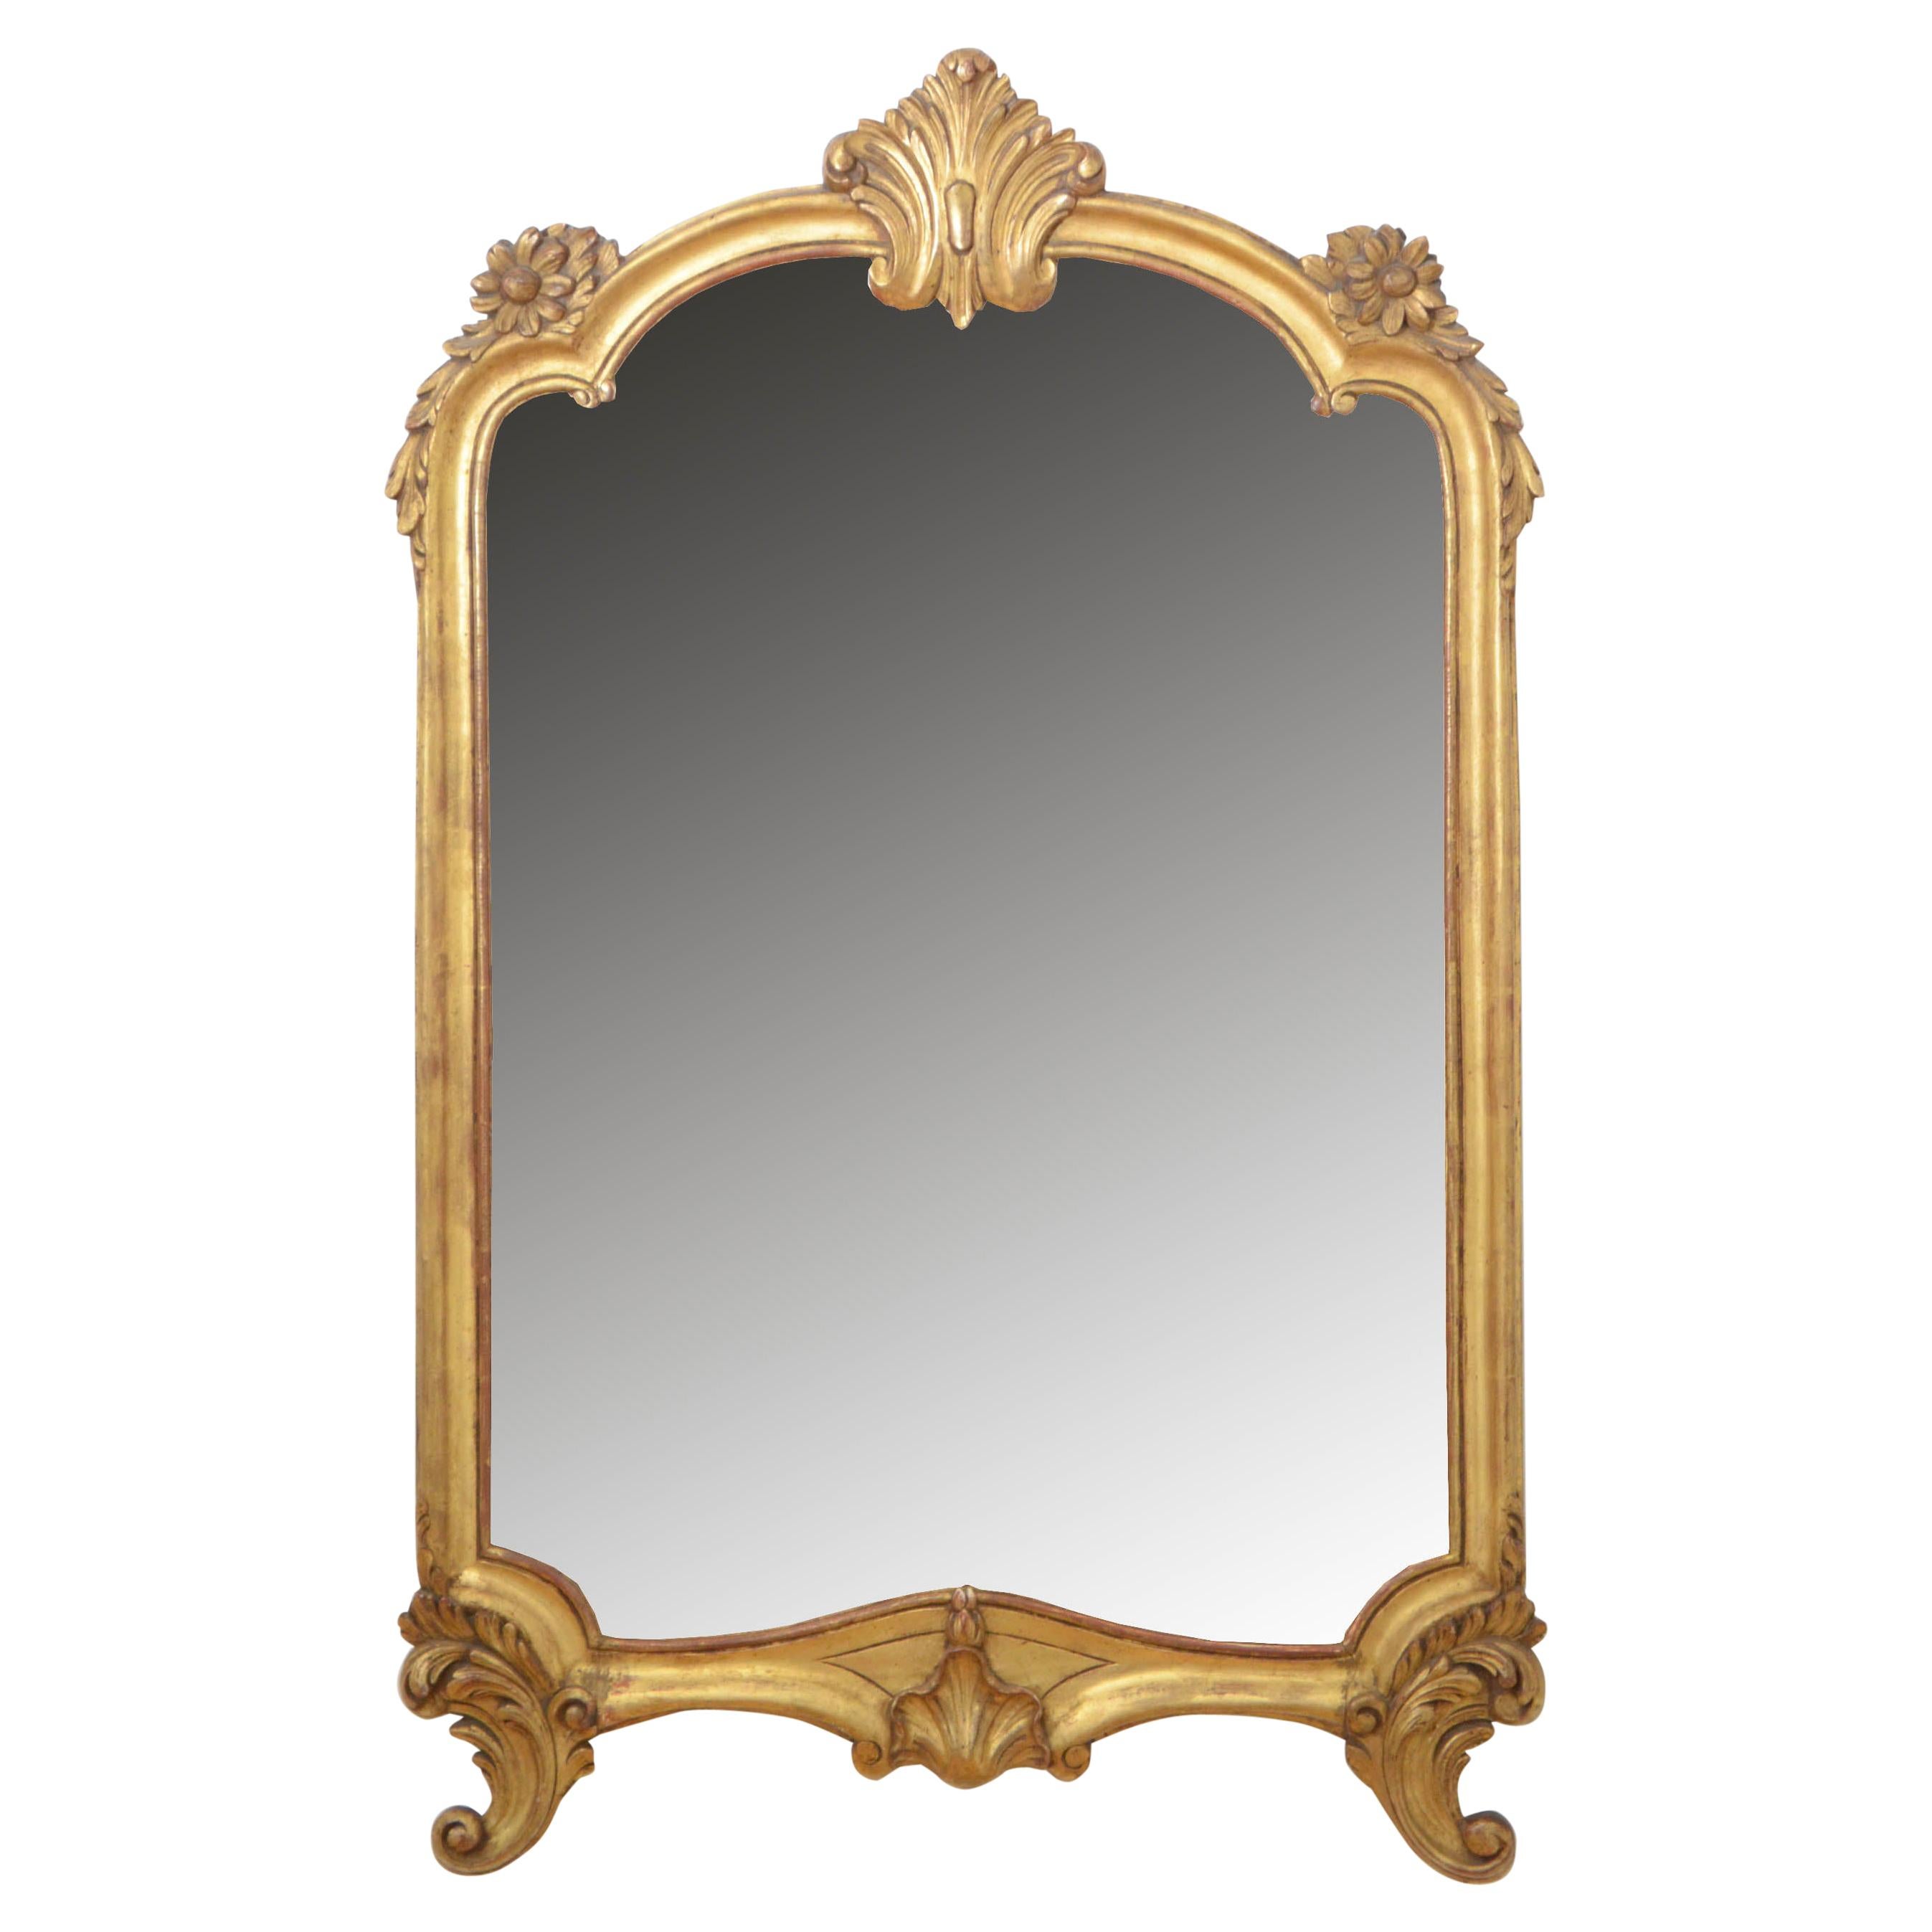 Turn of the Century Giltwood Wall Mirror